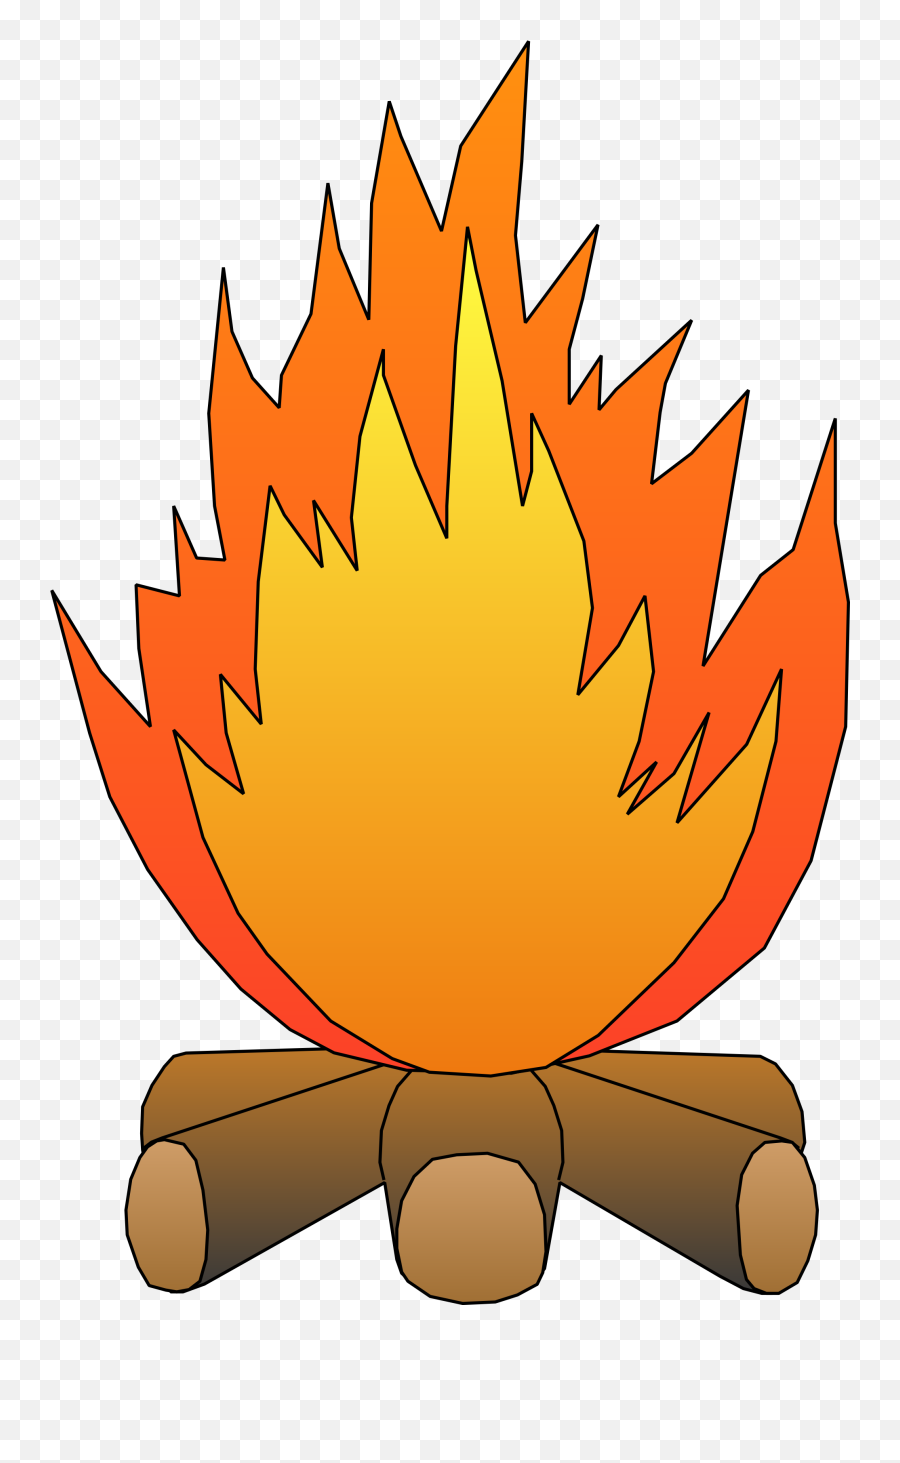 Clipart Of Fire Pit And Wilderness - Fire Pit Pictures Clipart Emoji,Emoji For Wilderness